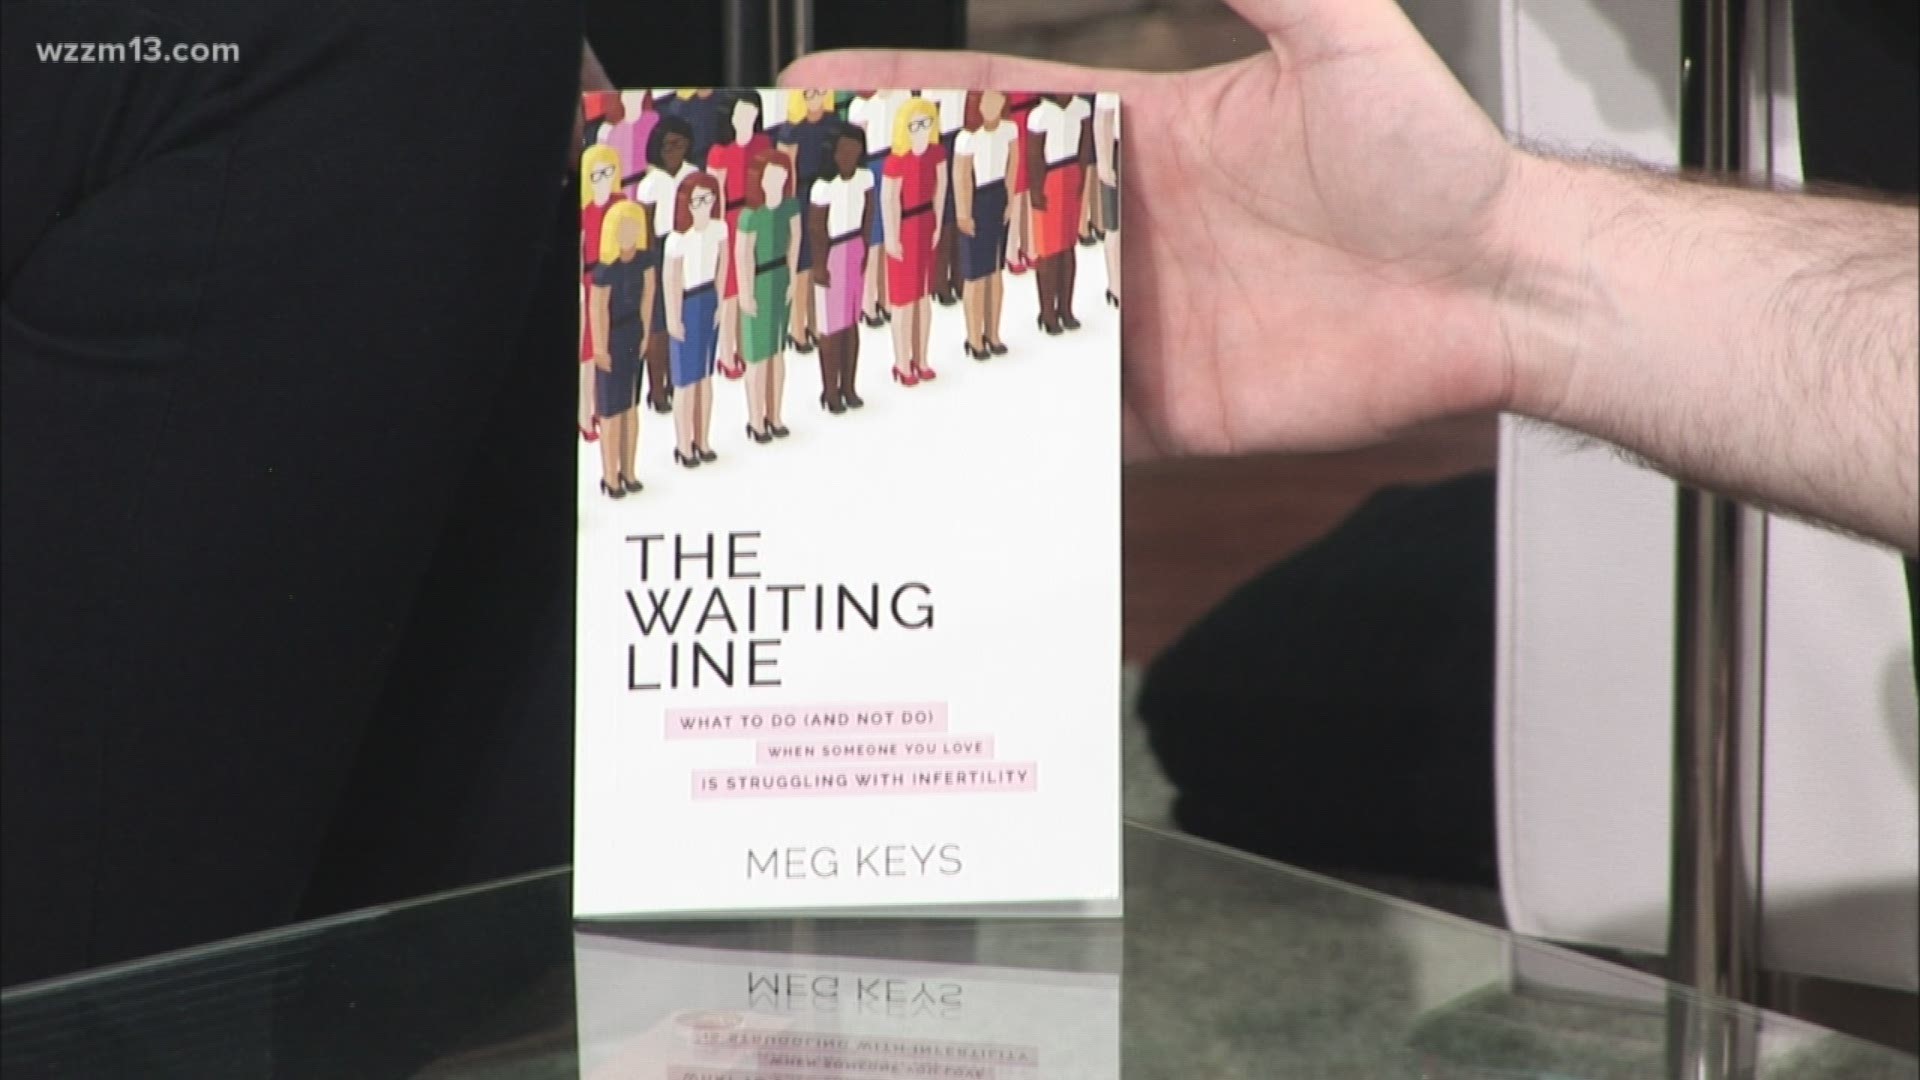 Michigan-based author, Meg Keys, released her new book, "The Waiting Line: What to do (and Not Do) When Someone You Love Is Struggling with Infertility," to support a loved one going through infertility and might not know the right words to say or the best way to show they care.